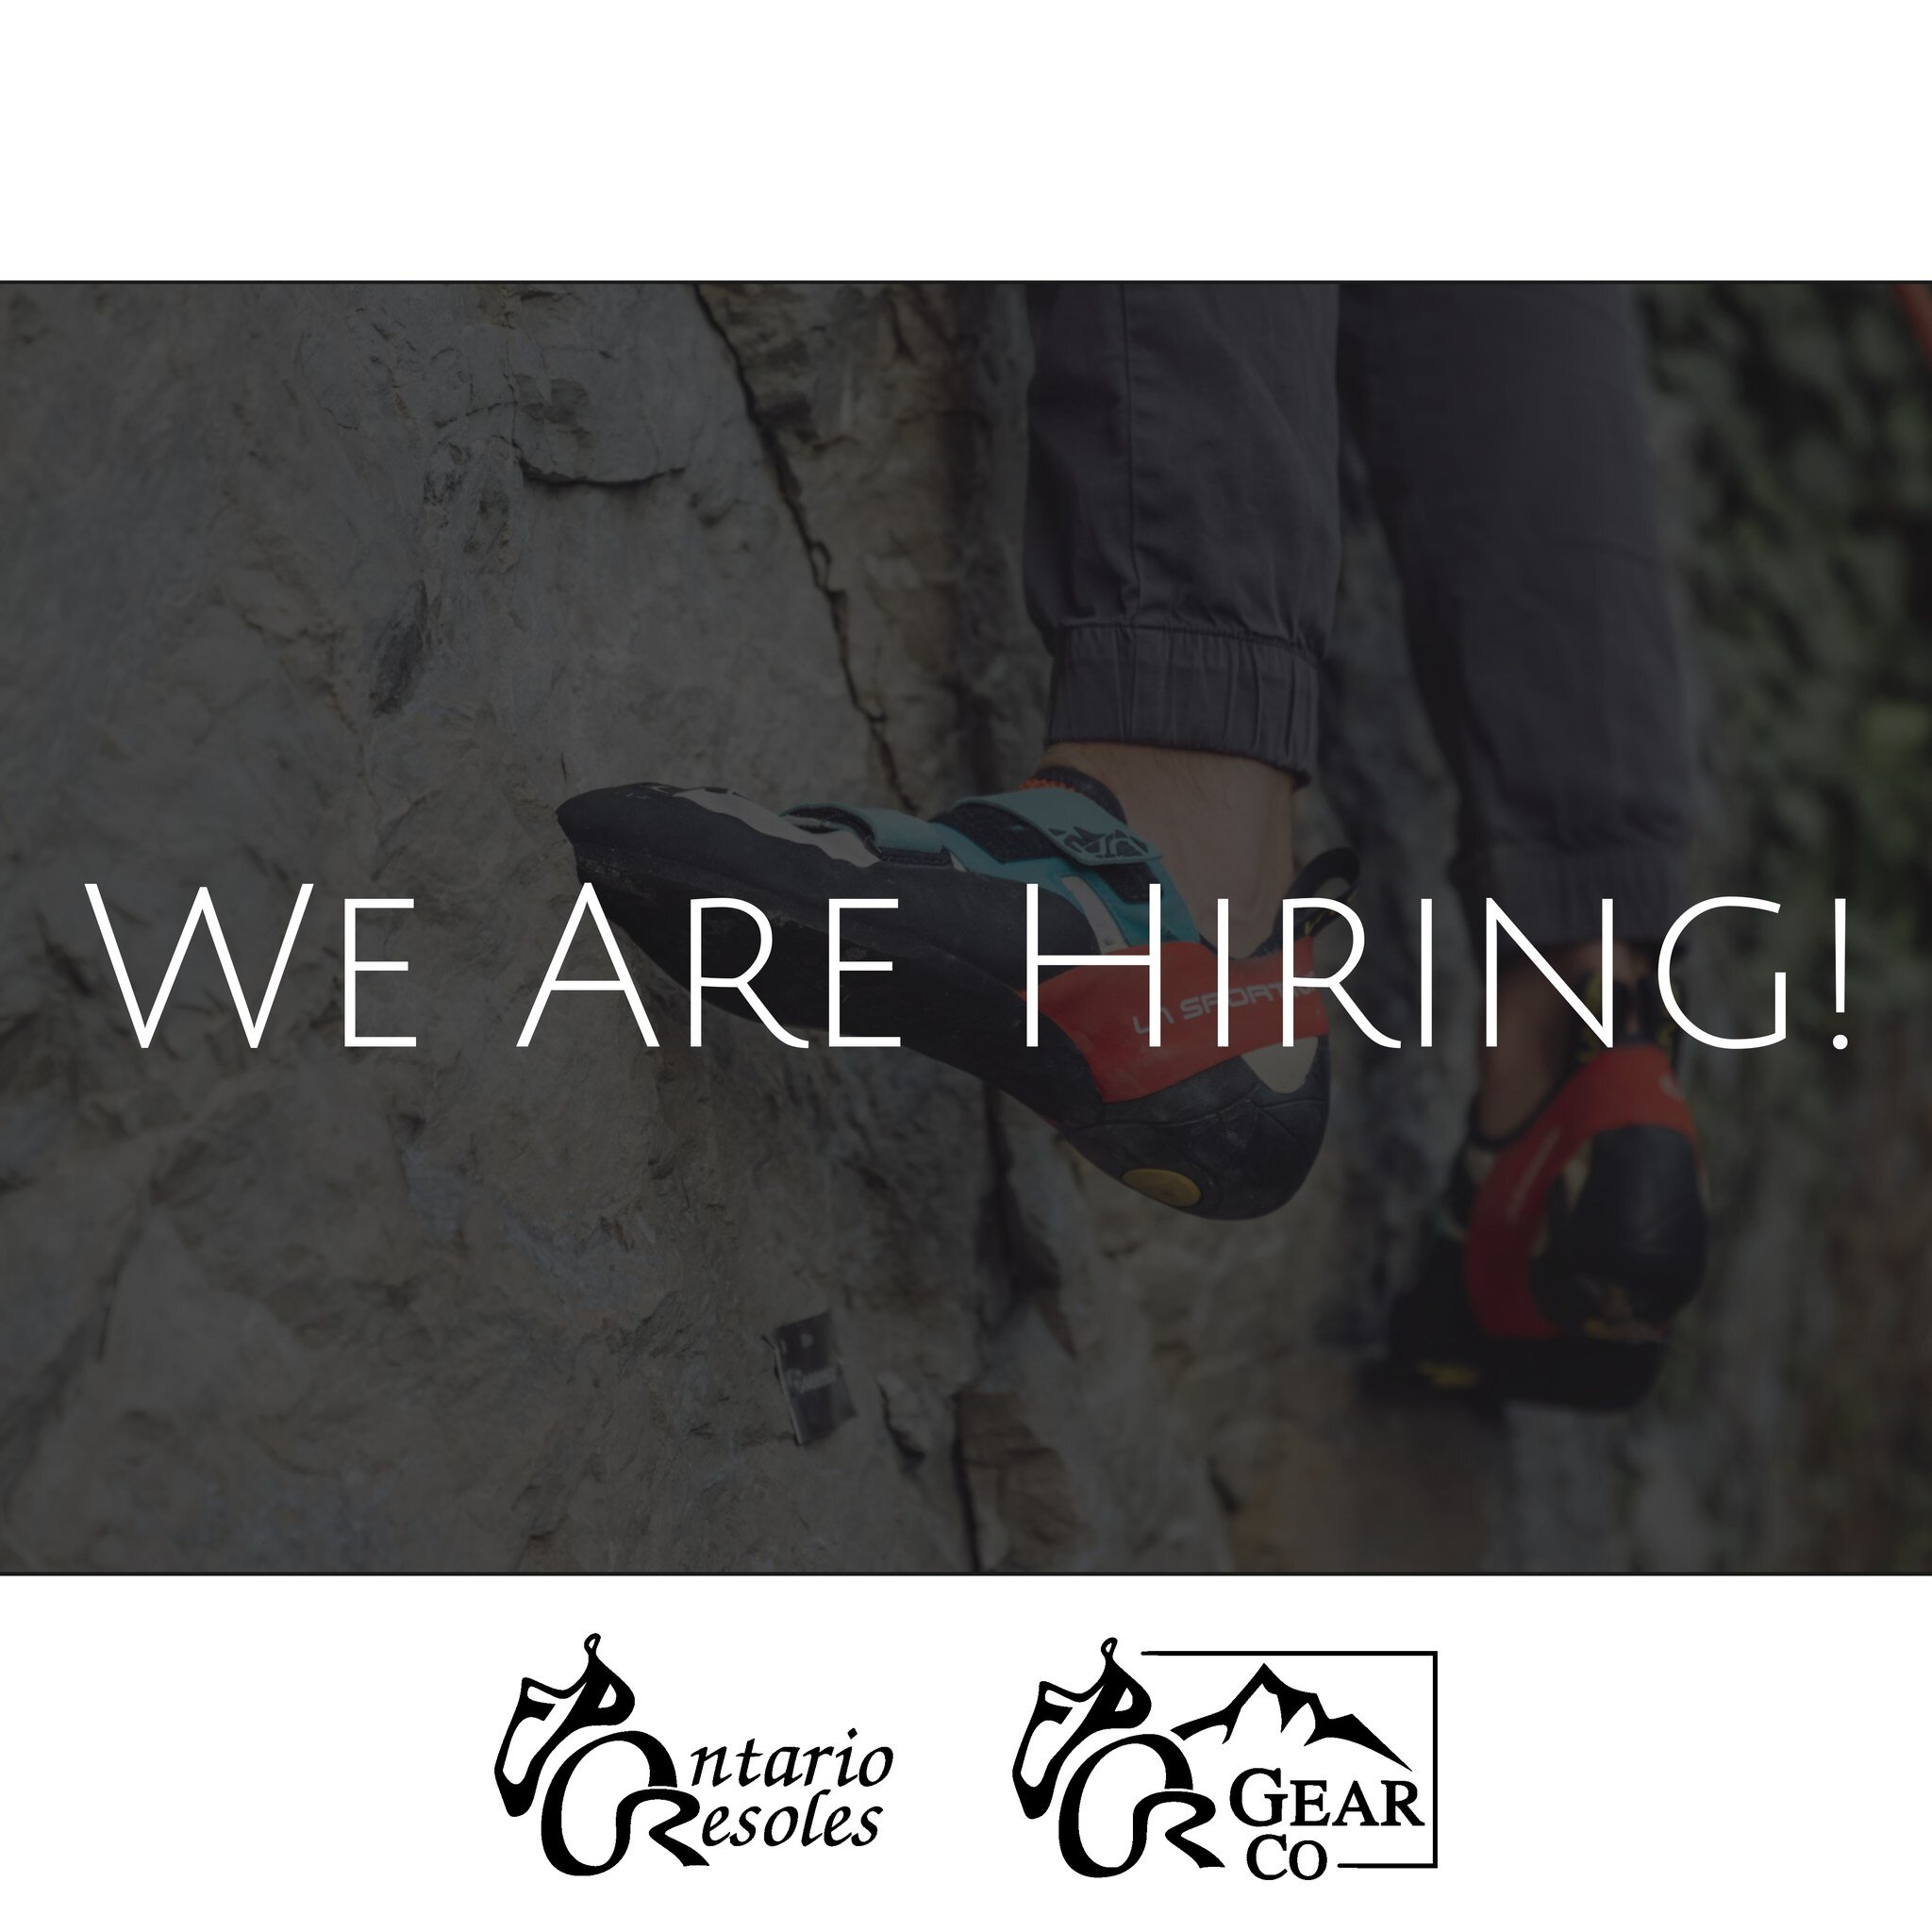 Join our passionate team!

We have an immediate opportunity for a full-time Resole Technician Apprentice, as well as opportunity for a part-time or full-time Resole &amp; Admin Assistant position.  Resoling experience not necessary. 

Reach out to us